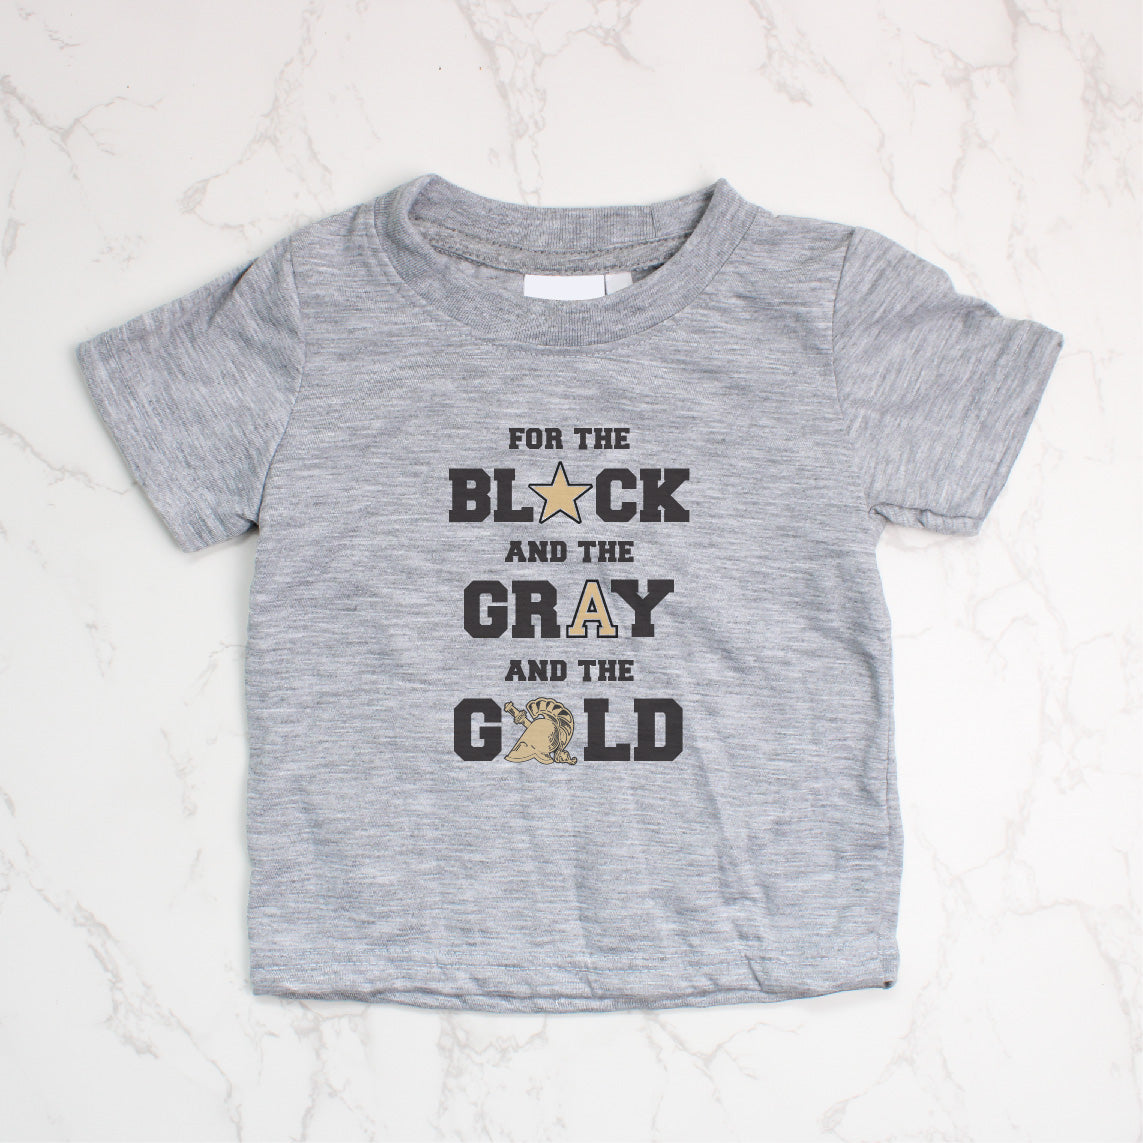 For the Black and the Gray and the Gold Tee